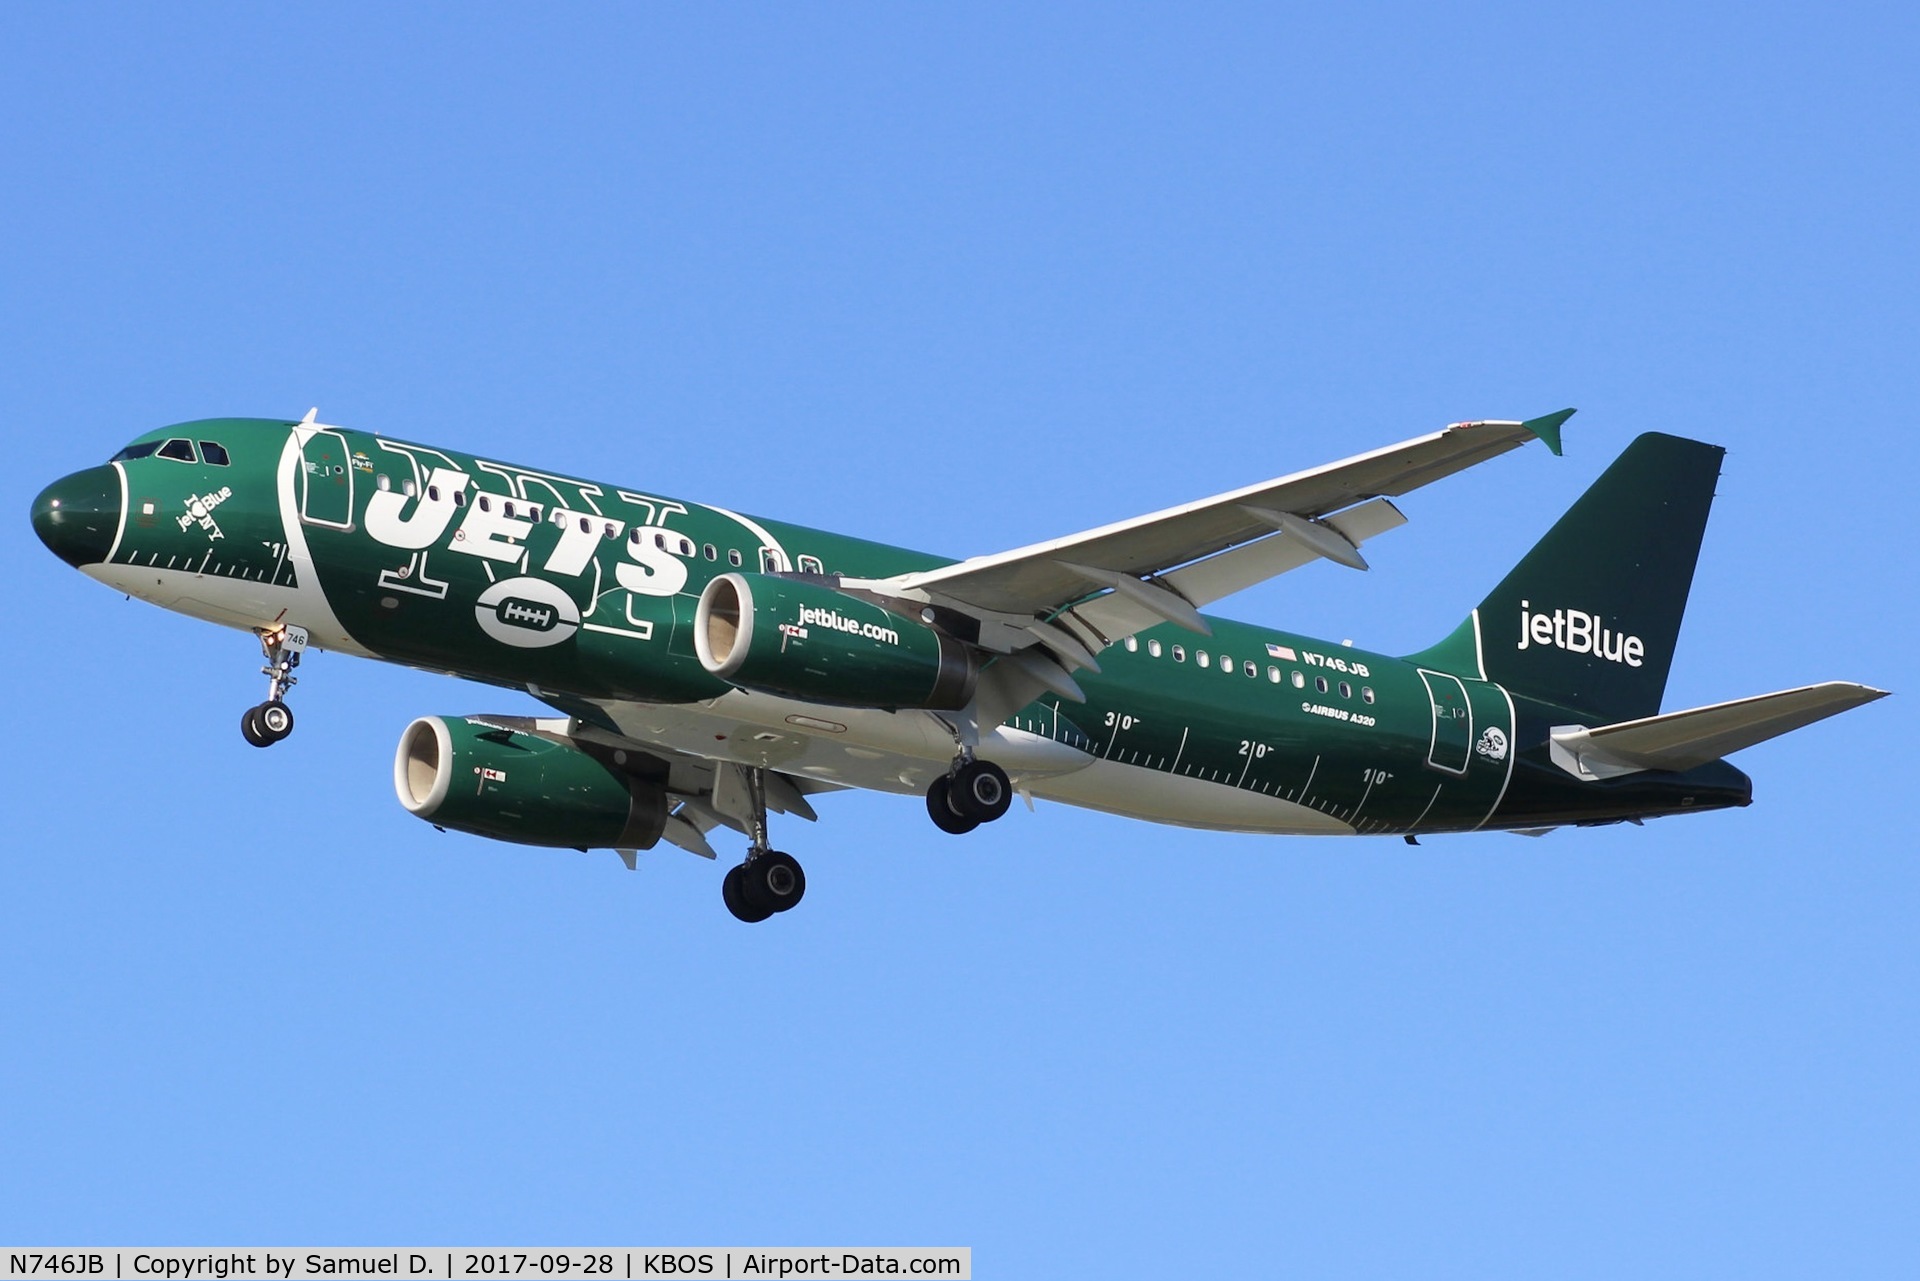 N746JB, 2008 Airbus A320-232 C/N 3622, New NY Jets livery landing at KBOS on runway 27